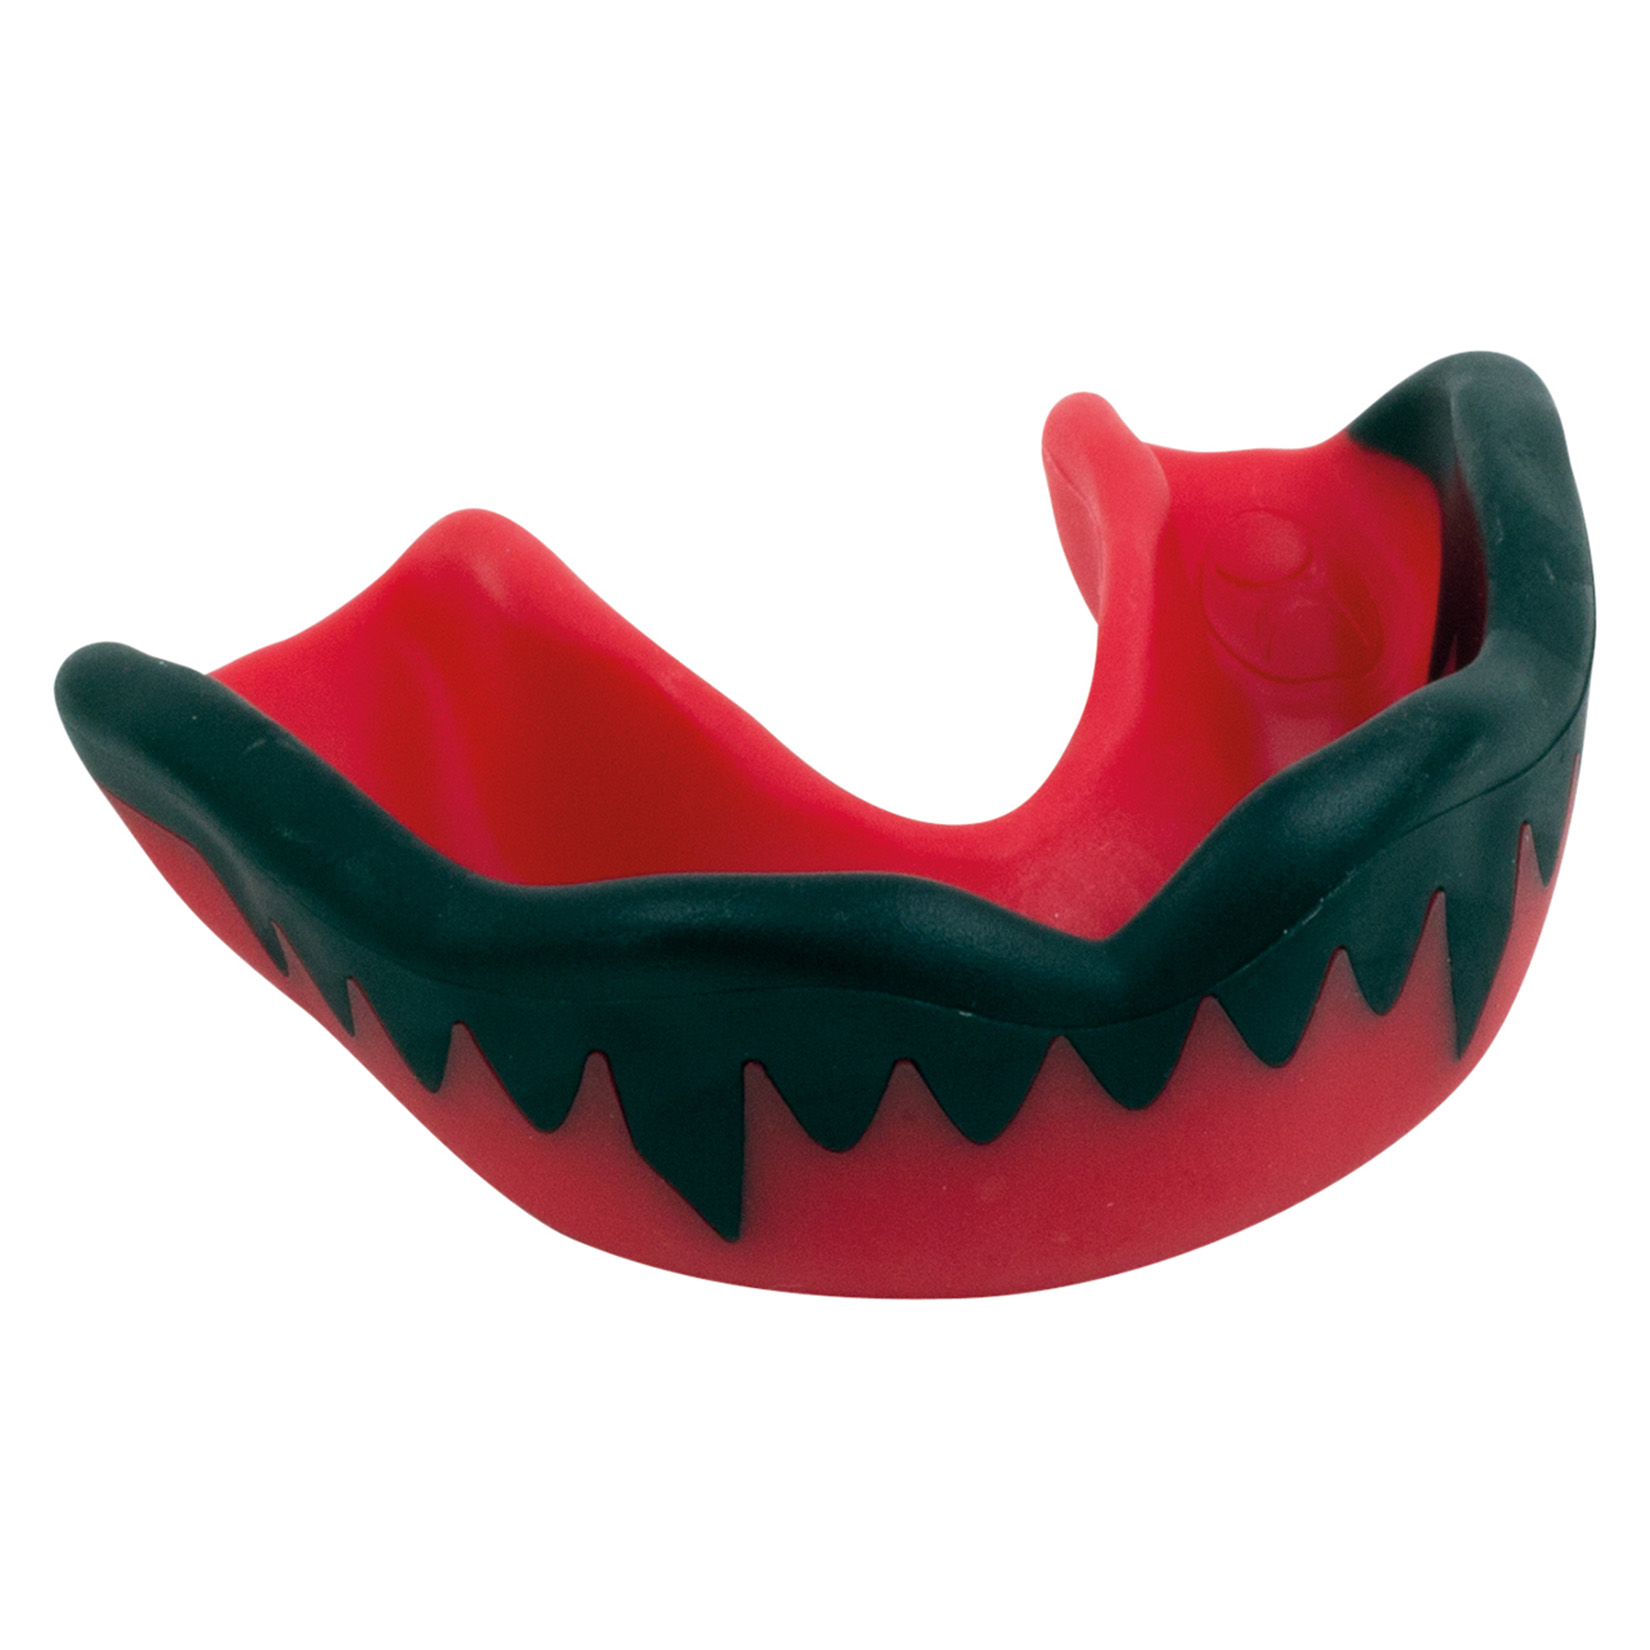 Gilbert SYNERGIE VIPER MOUTHGUARD Red-Black